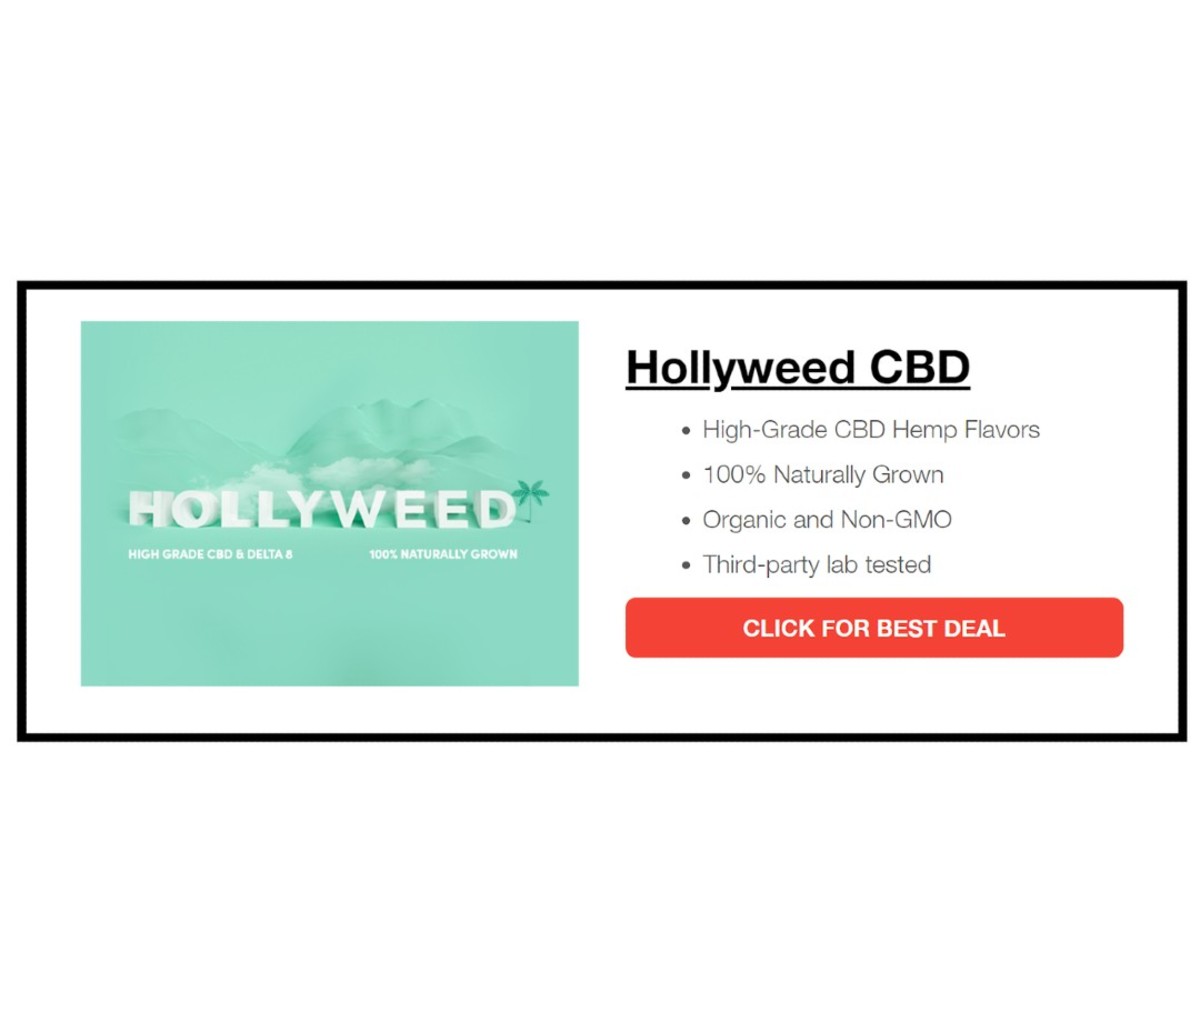 Hollyweed CBD - Exceptional Quality & Variety Flavor Delta-8 Products